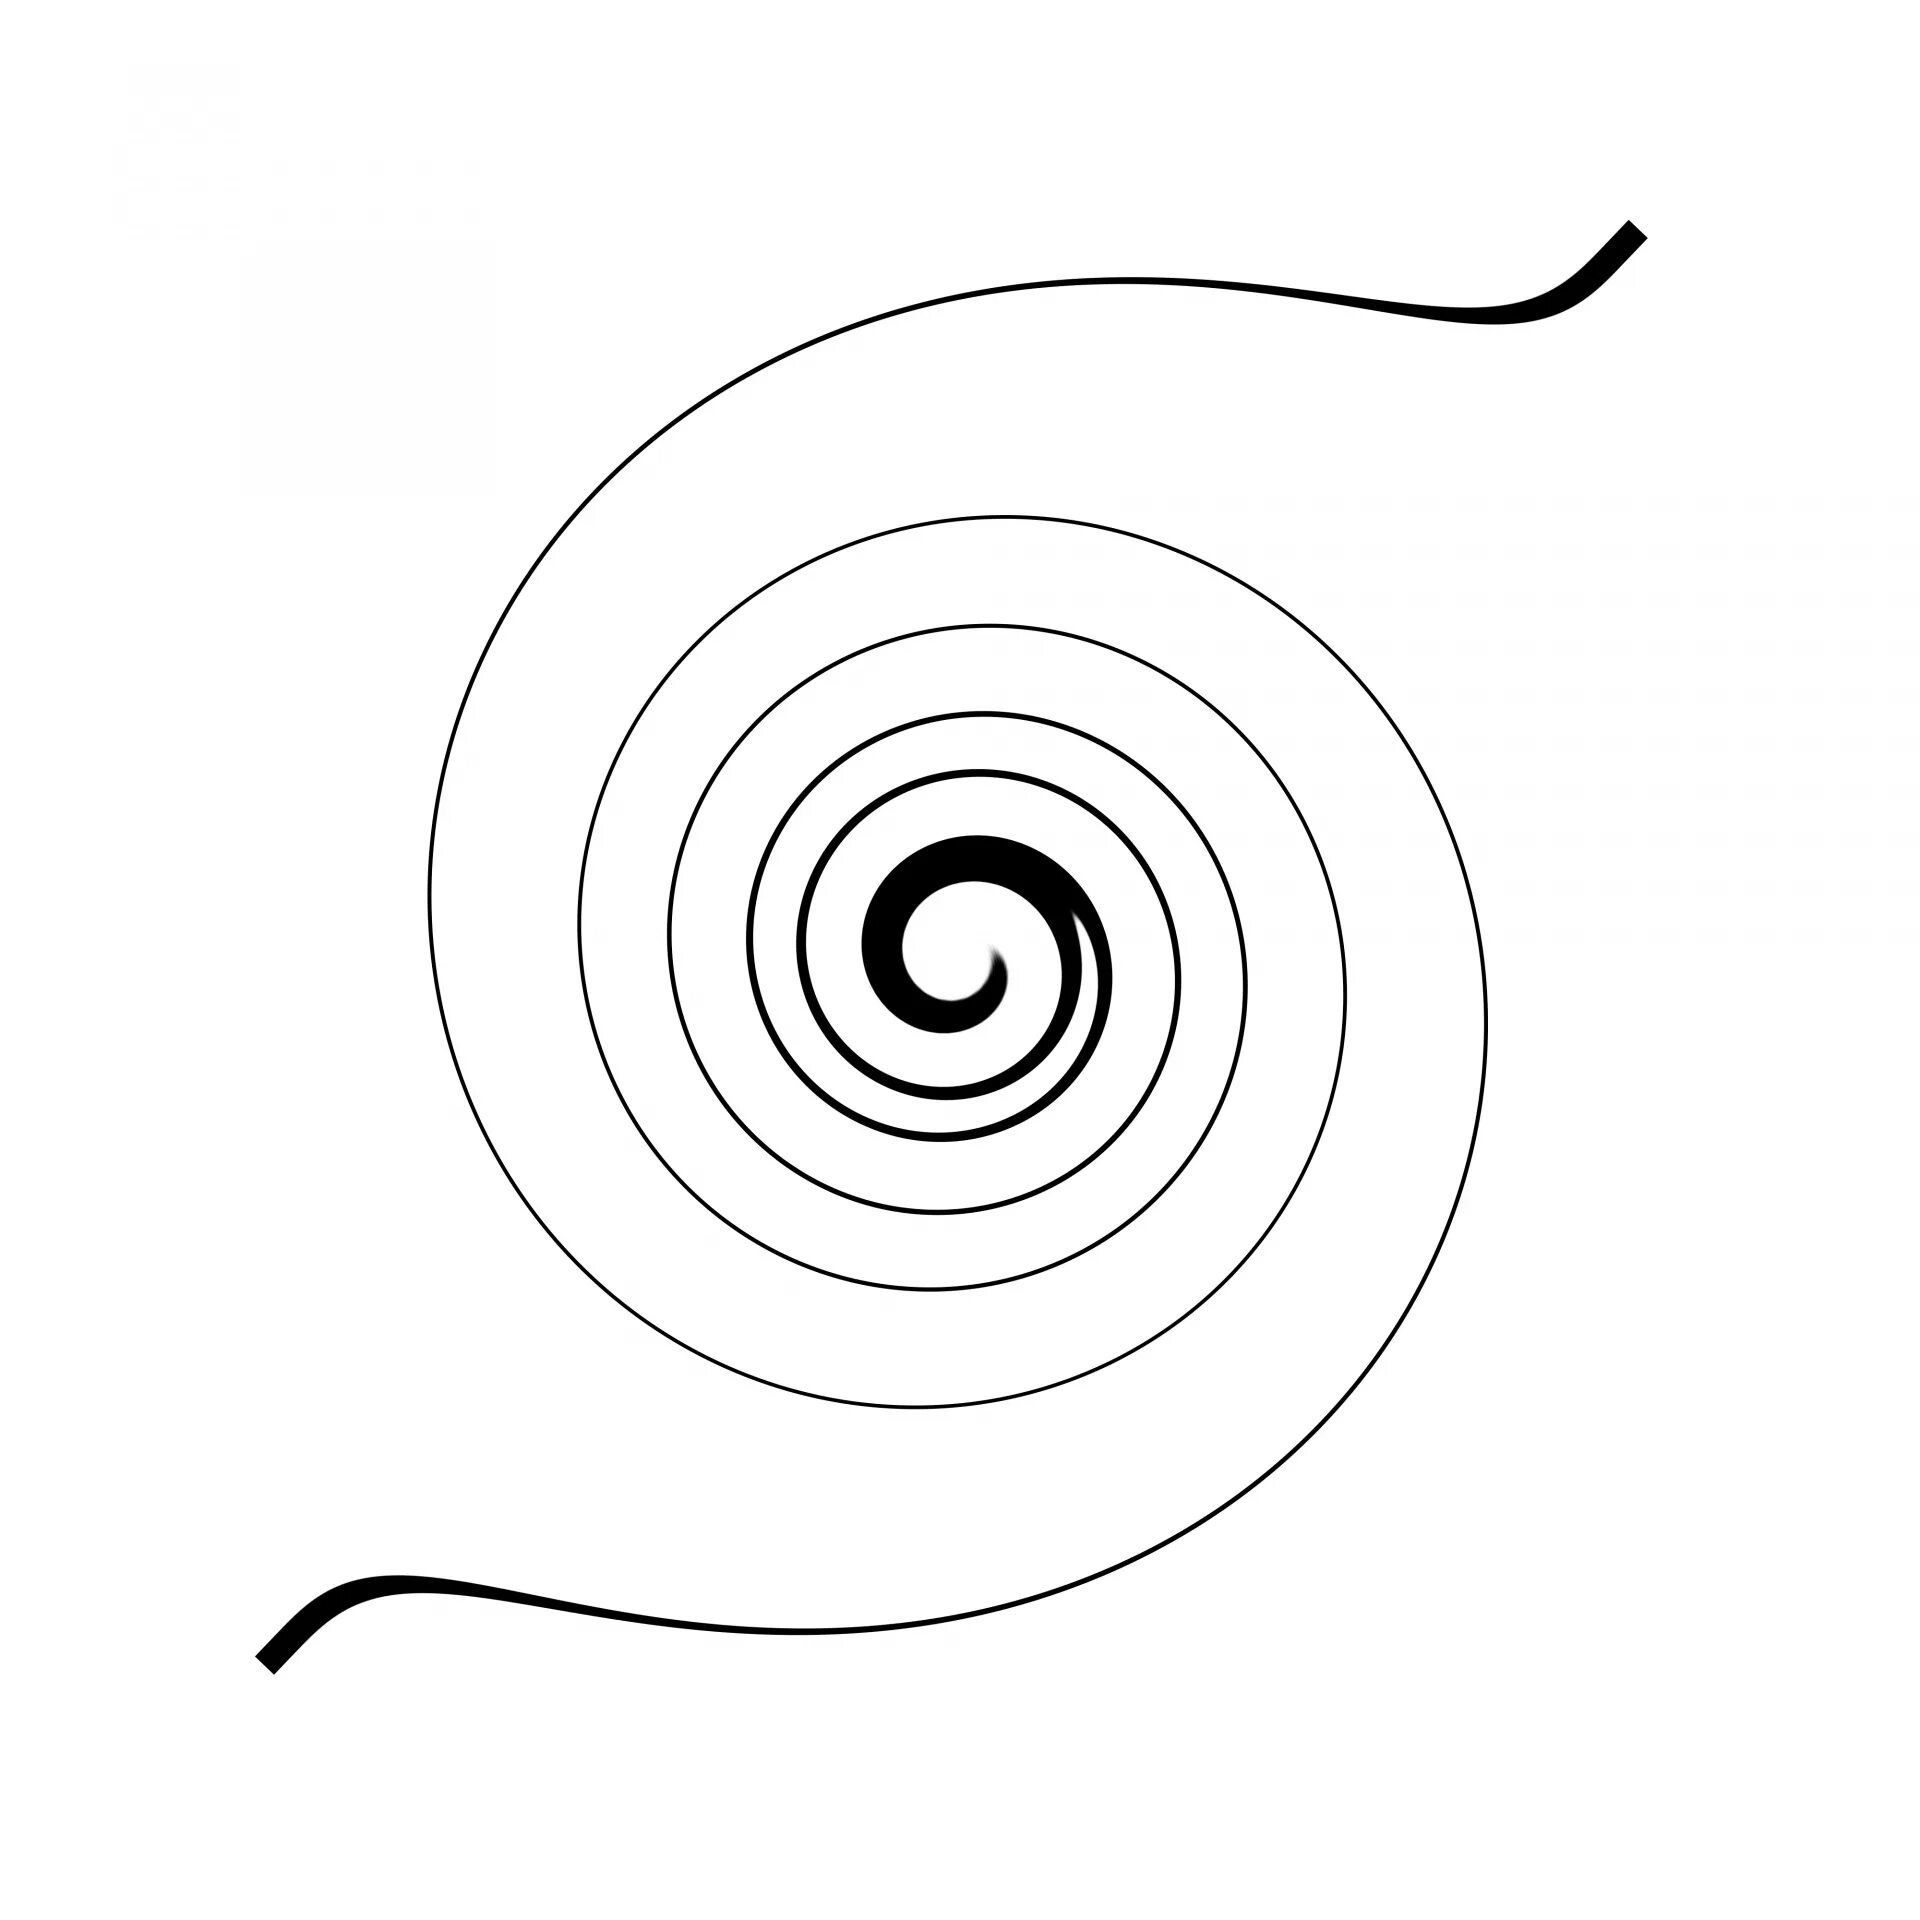 Living spiral coloring